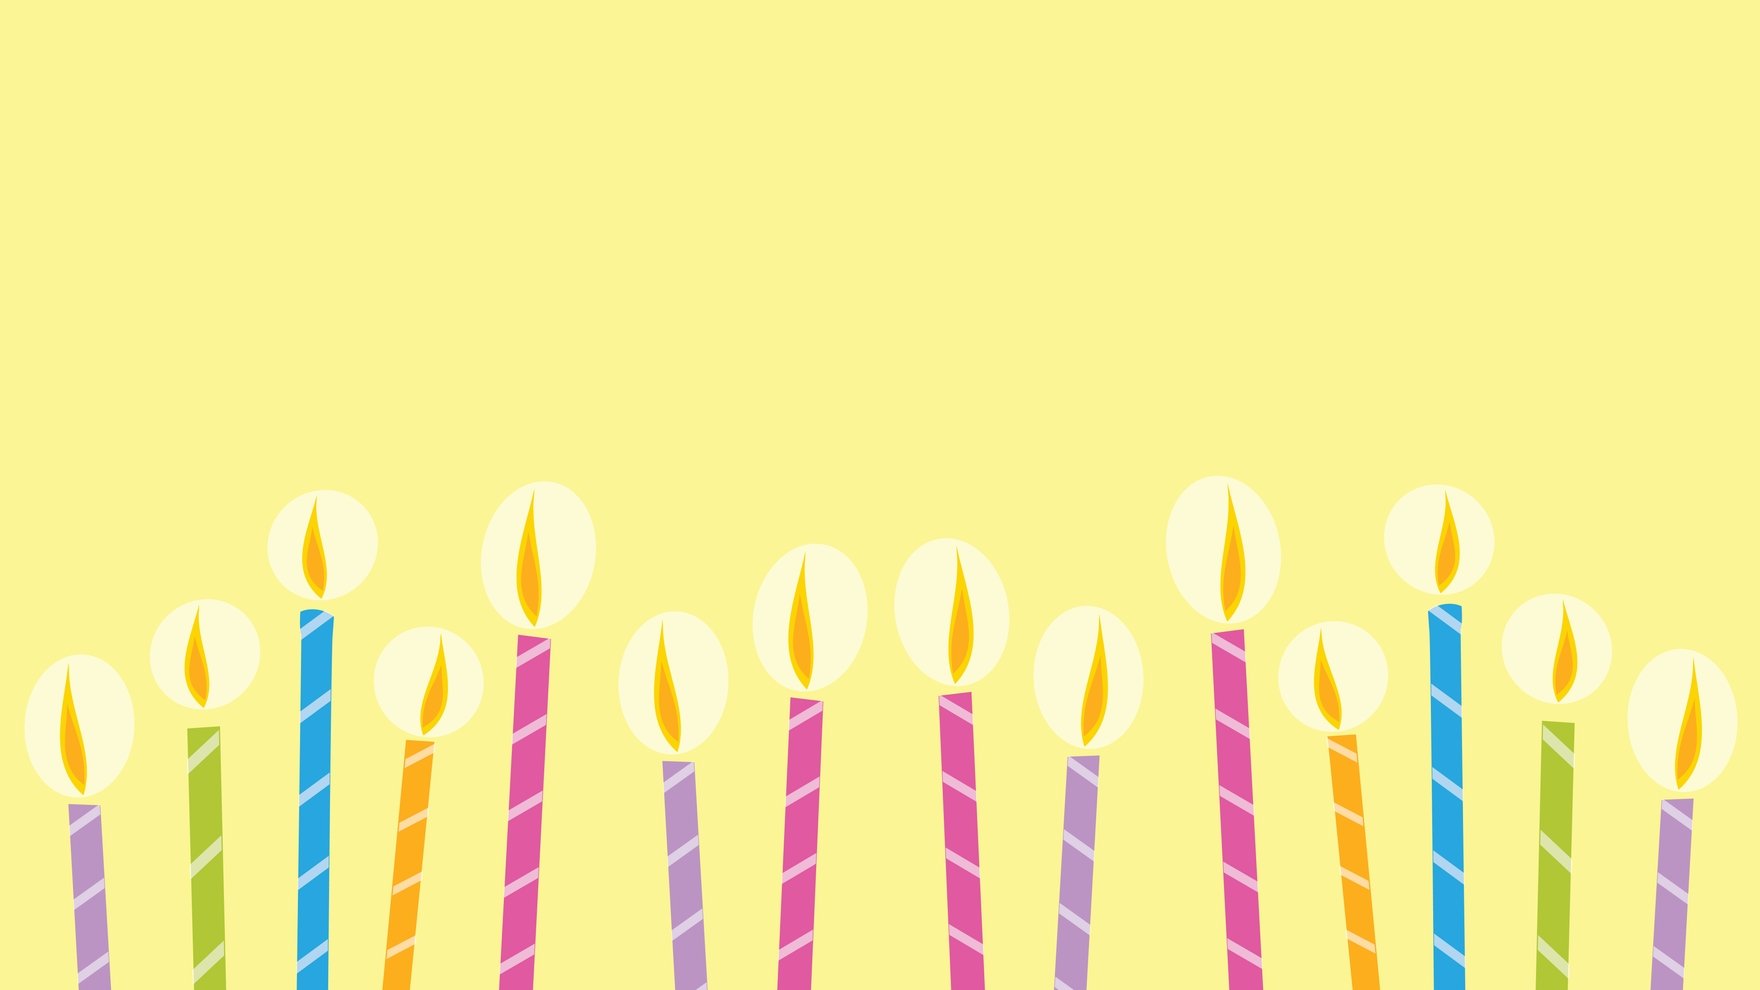 Free Birthday Candle Background Download in Illustrator, EPS, SVG